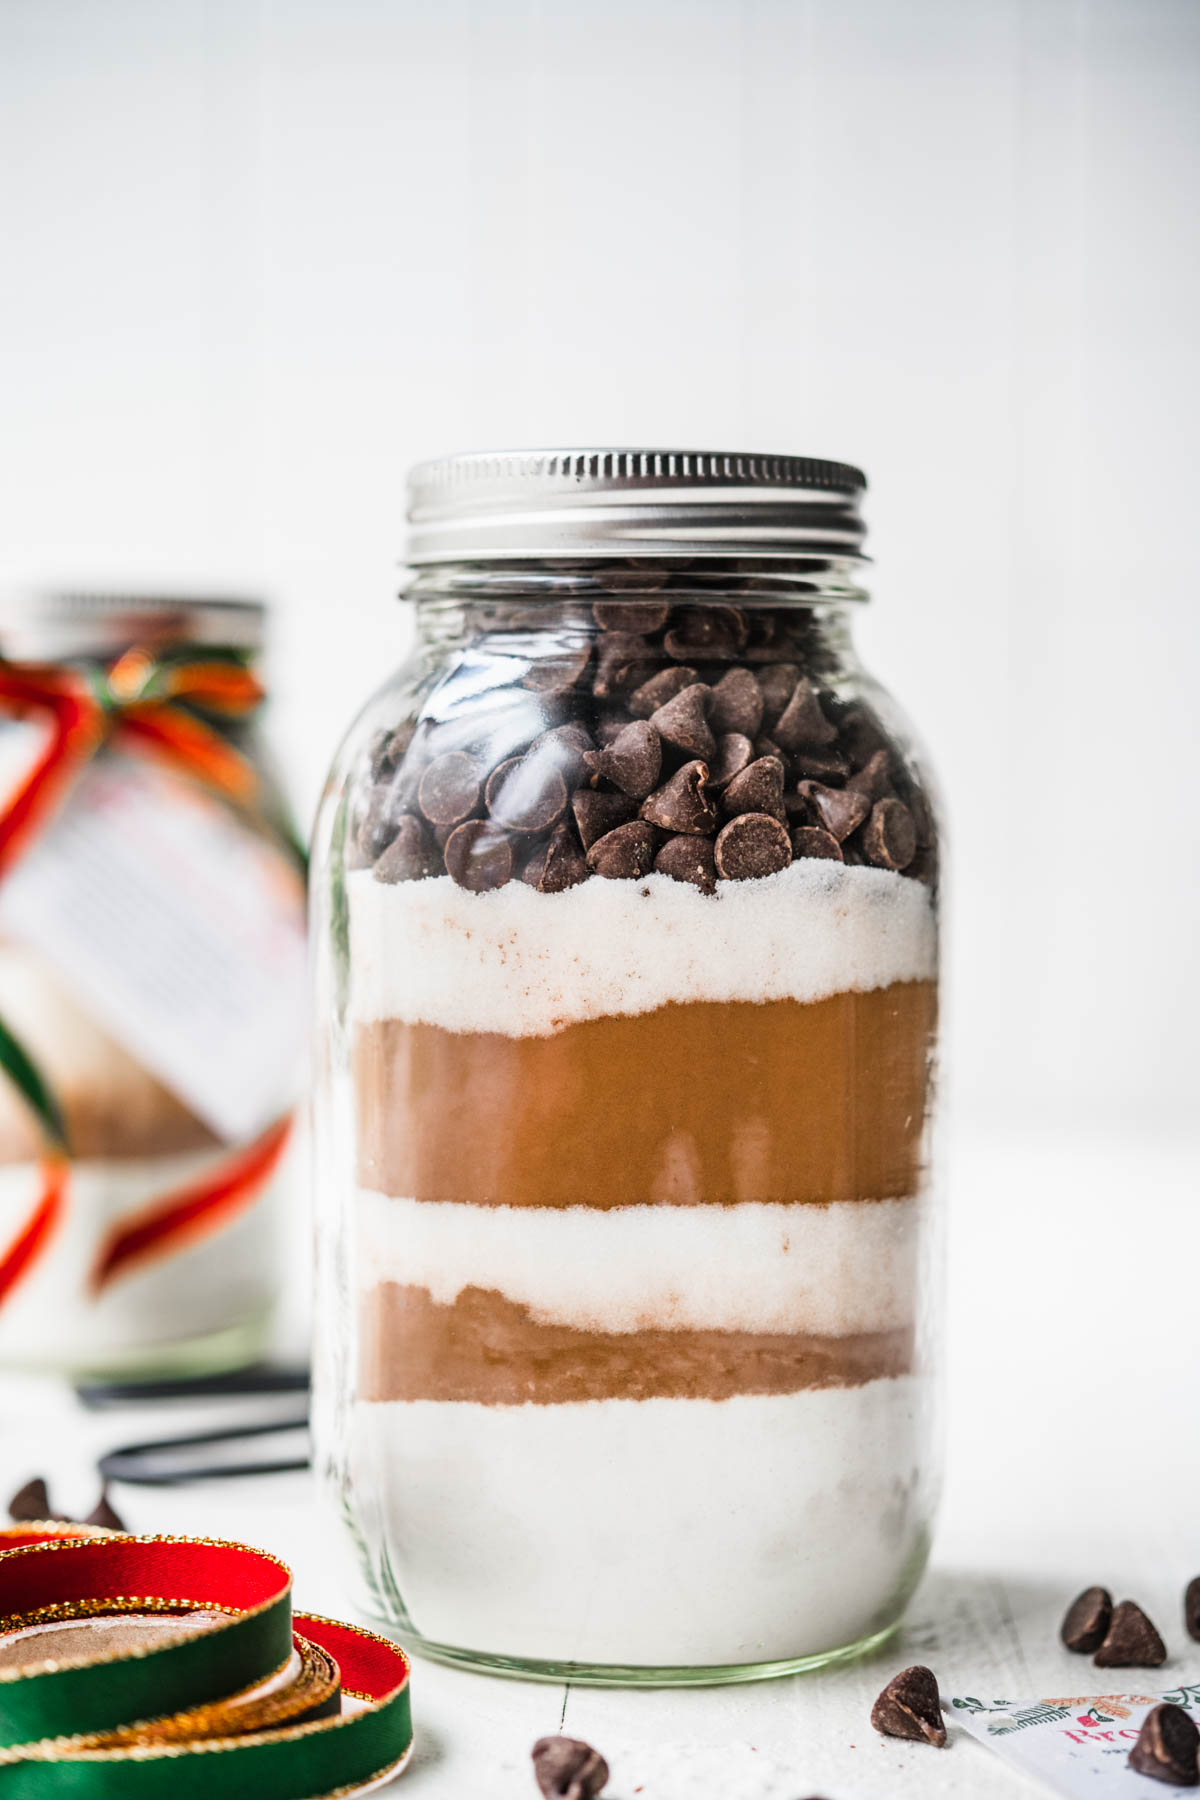 Brownies in a Jar with layered ingredients